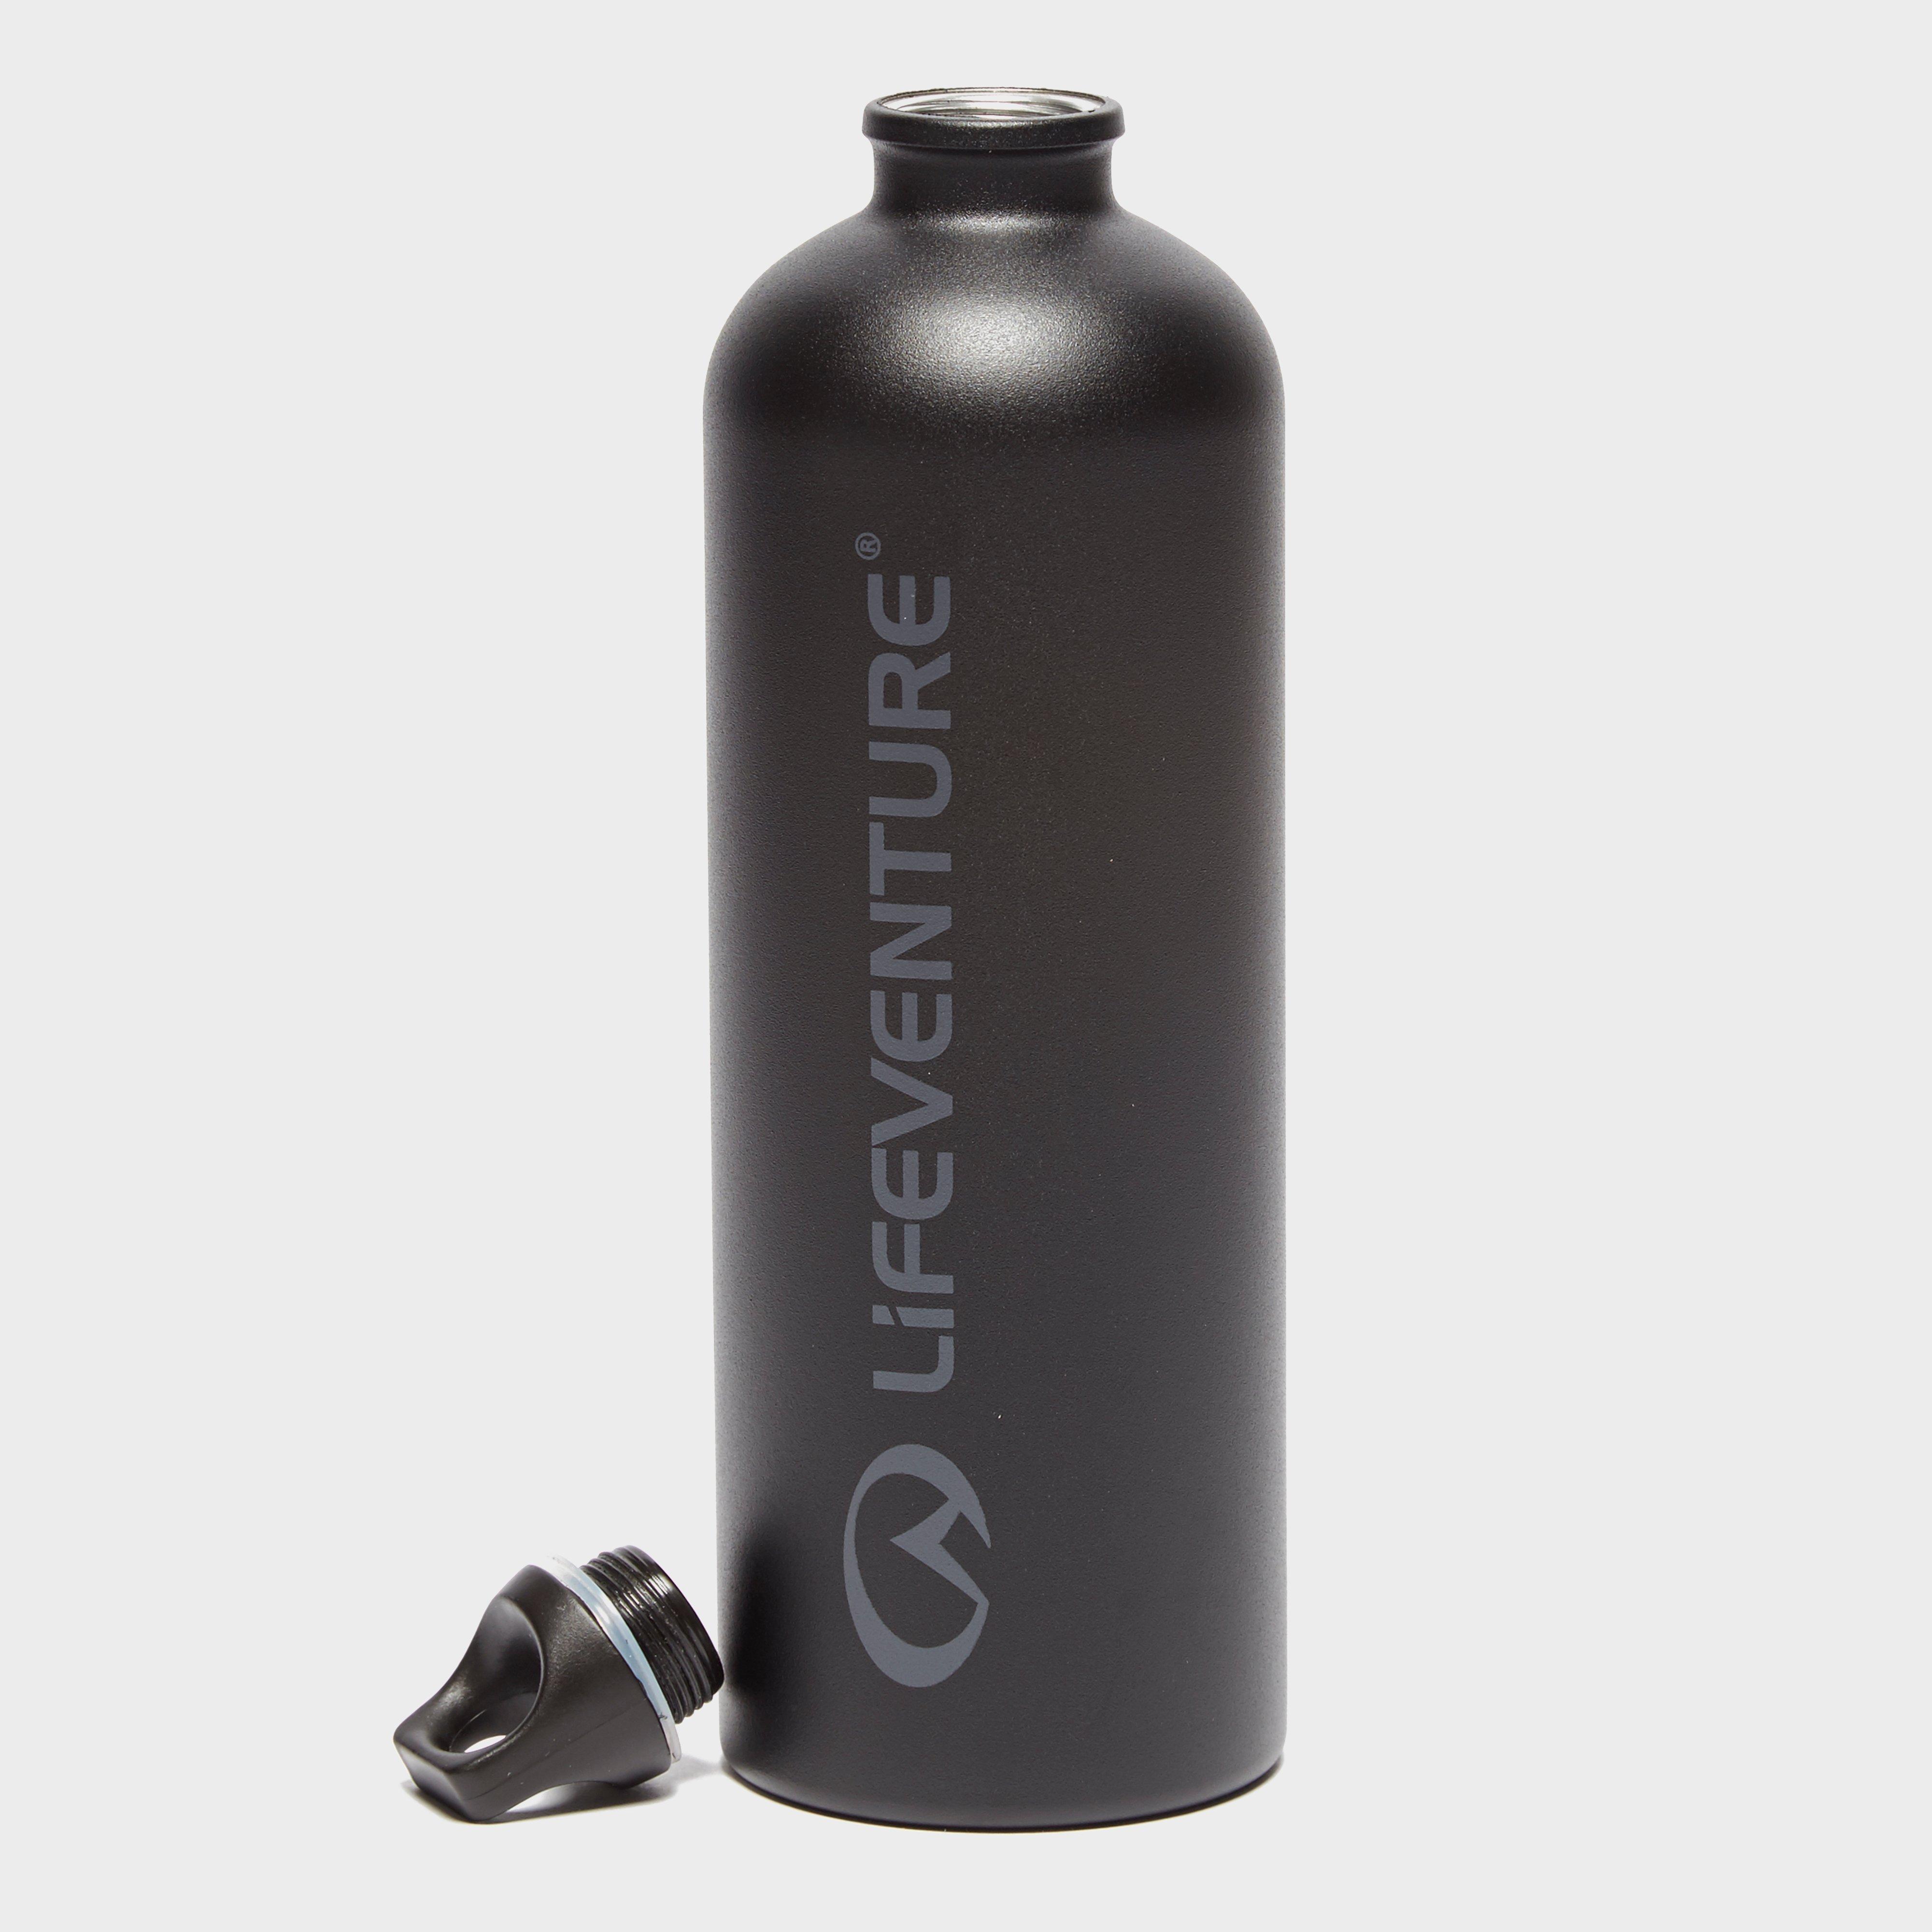 Lifeventure Stainless Steel 1L Bottle Review